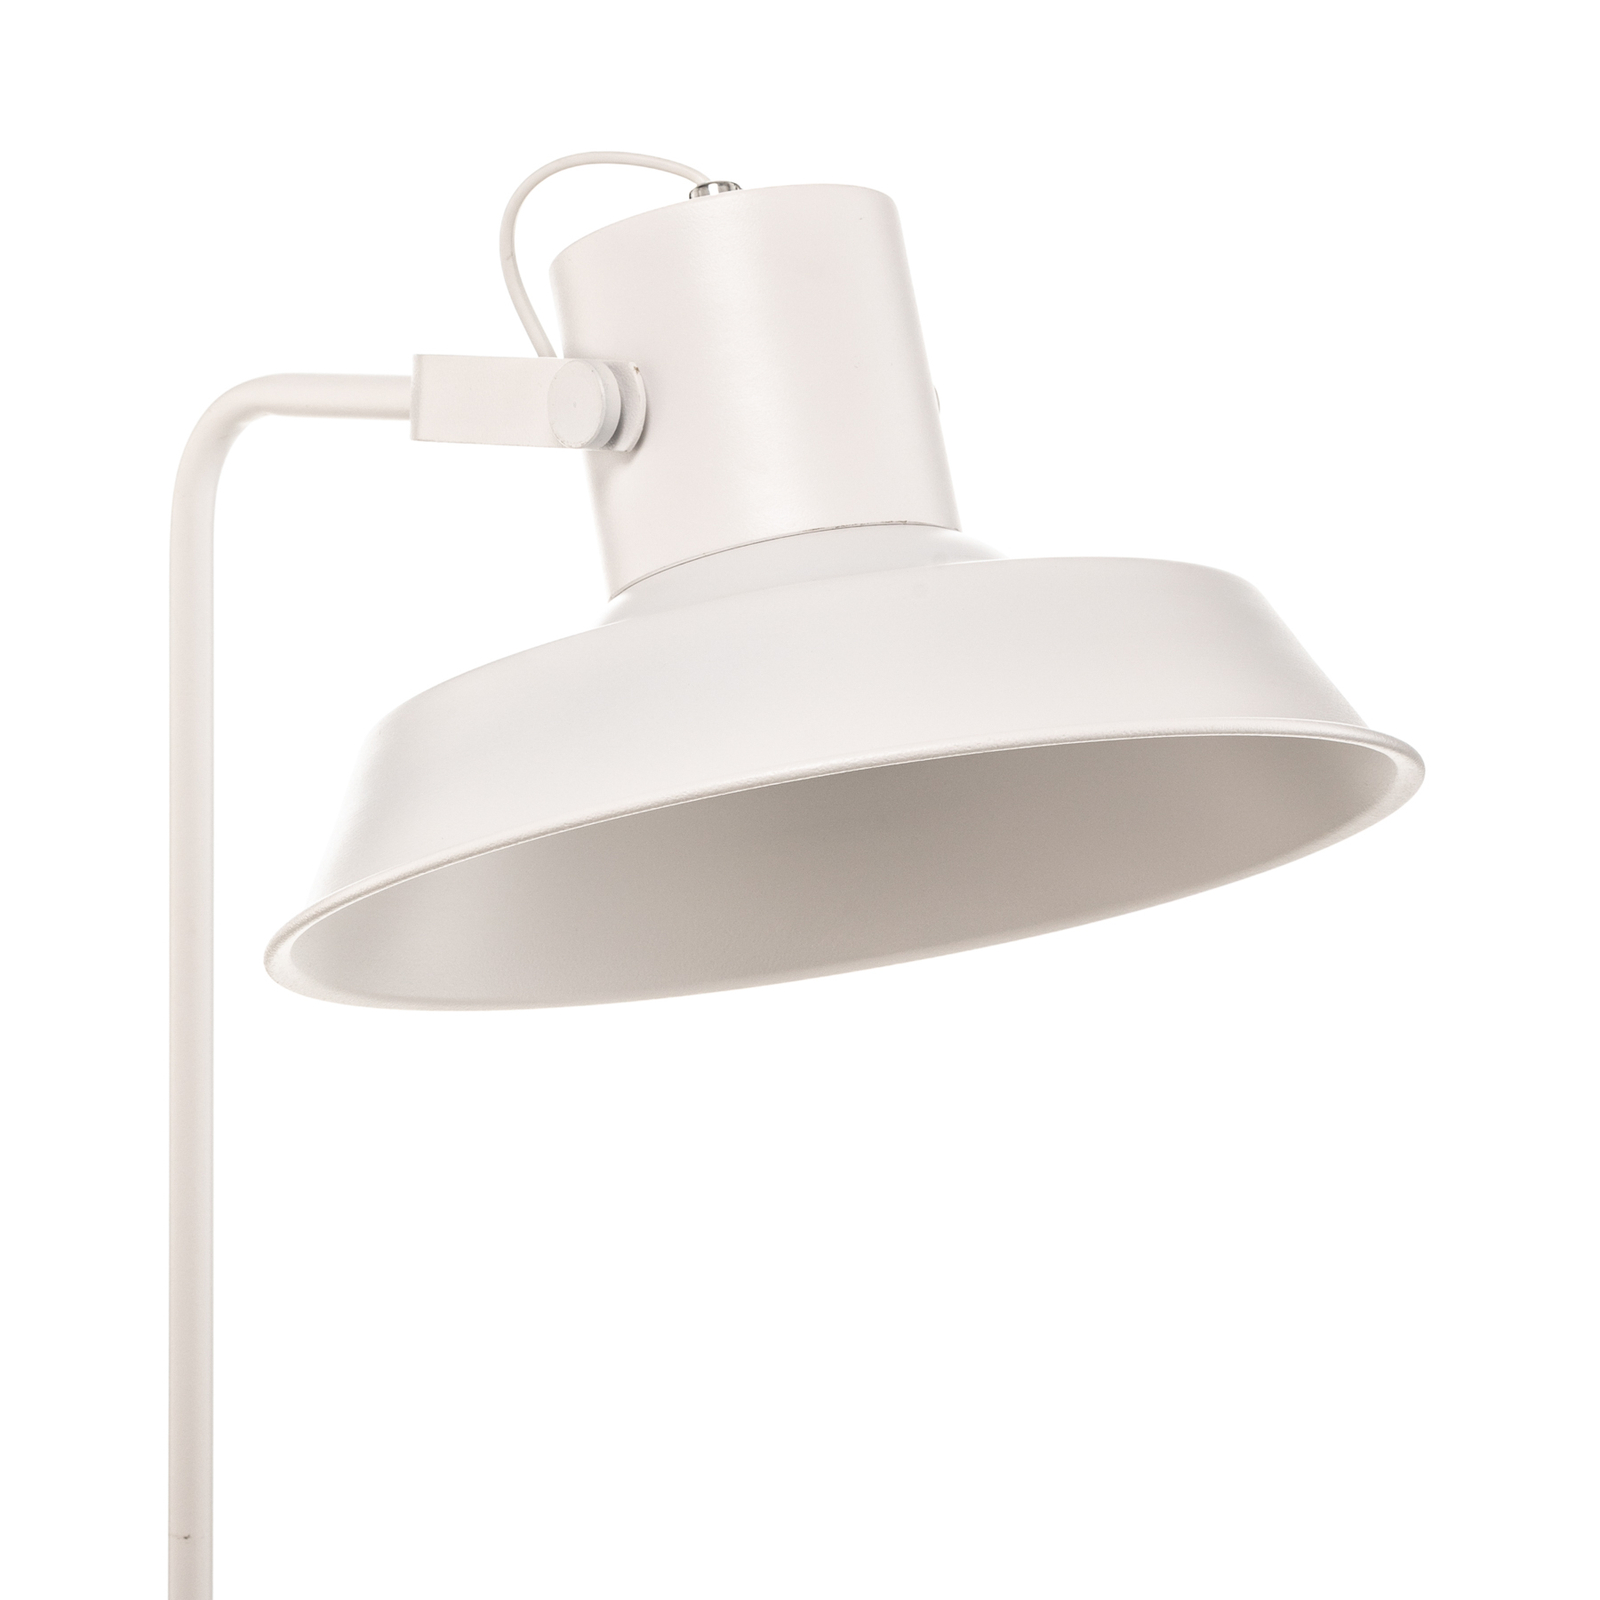 Lindby Berami floor lamp with a shelf, white